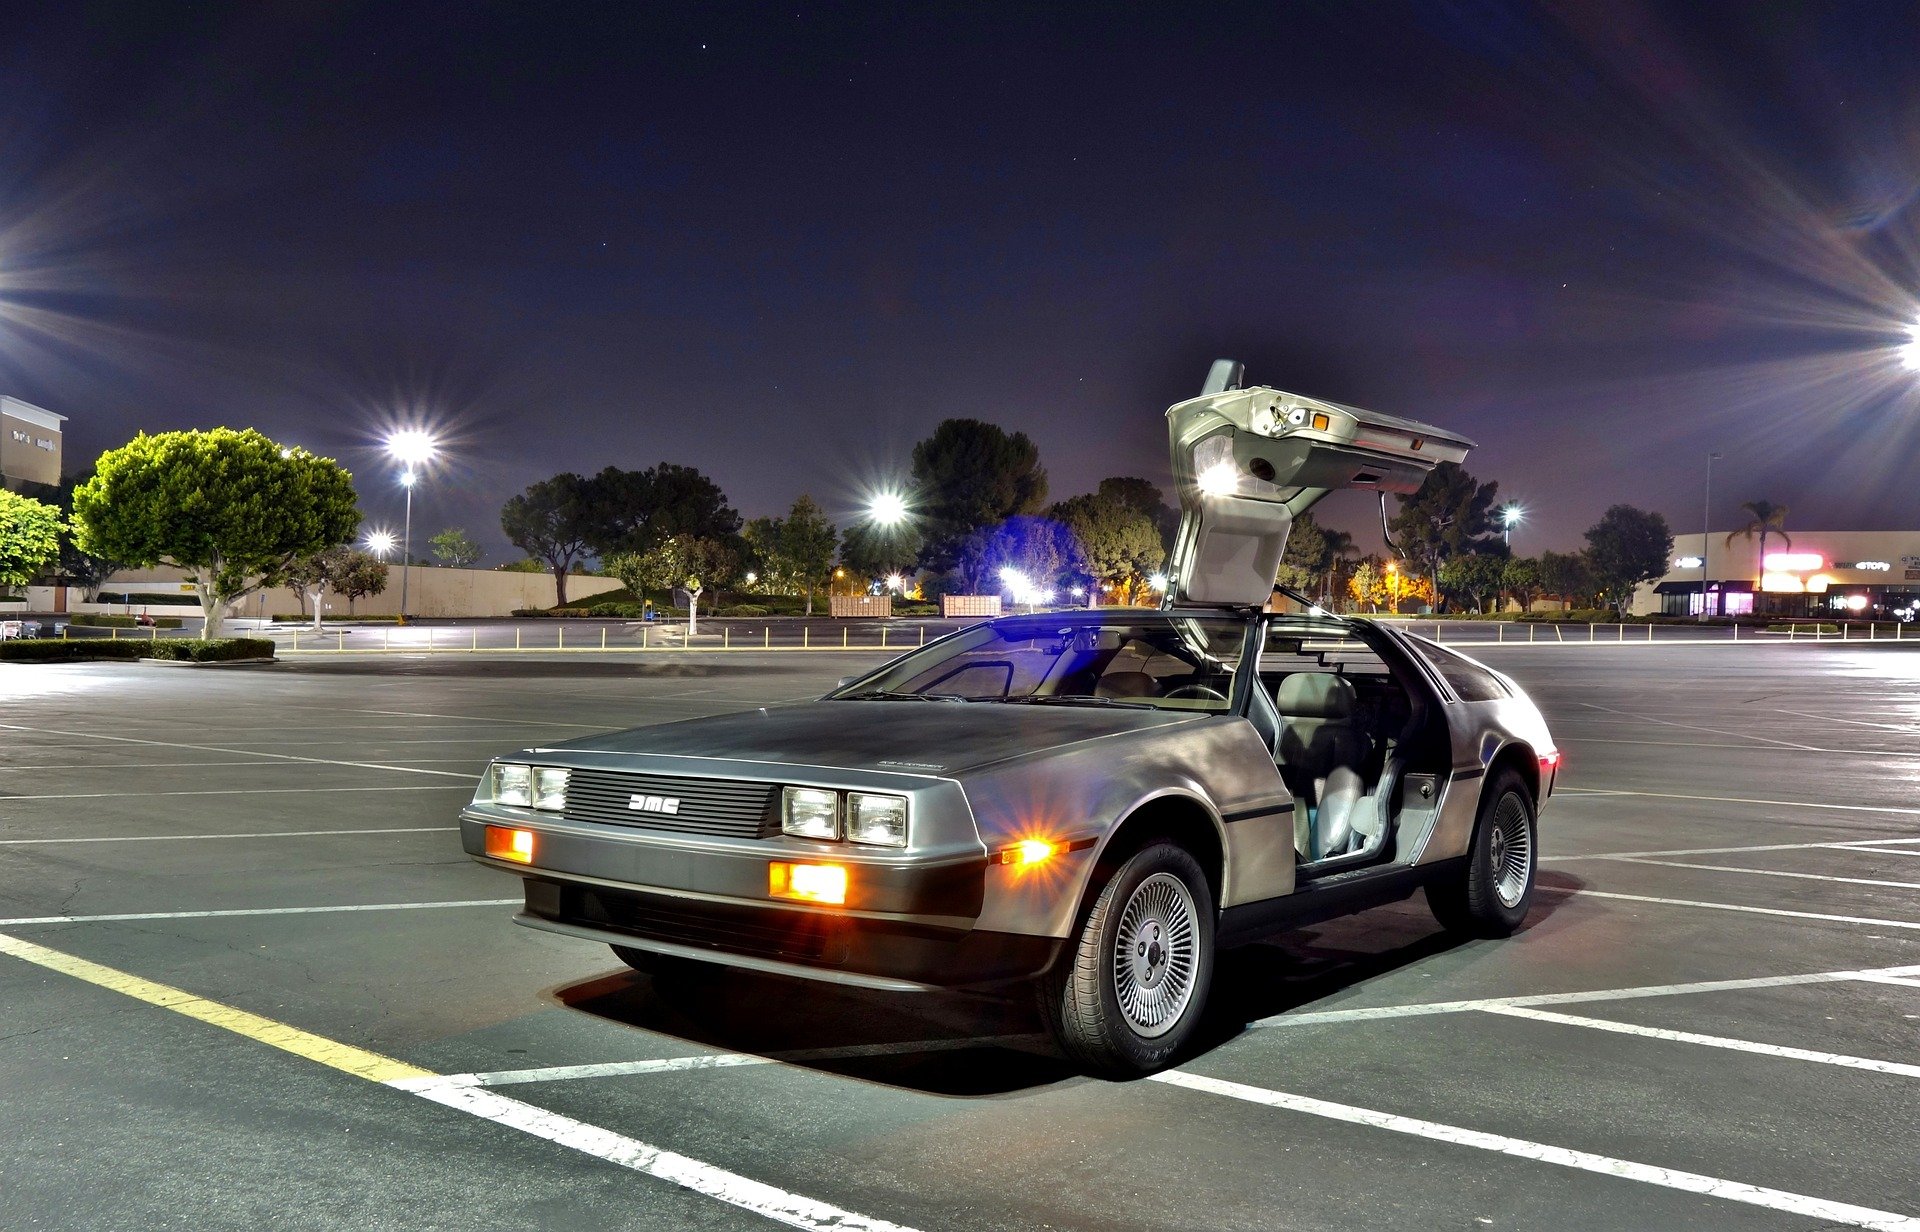 DeLorean time machine in an open air car park at night, with one door open